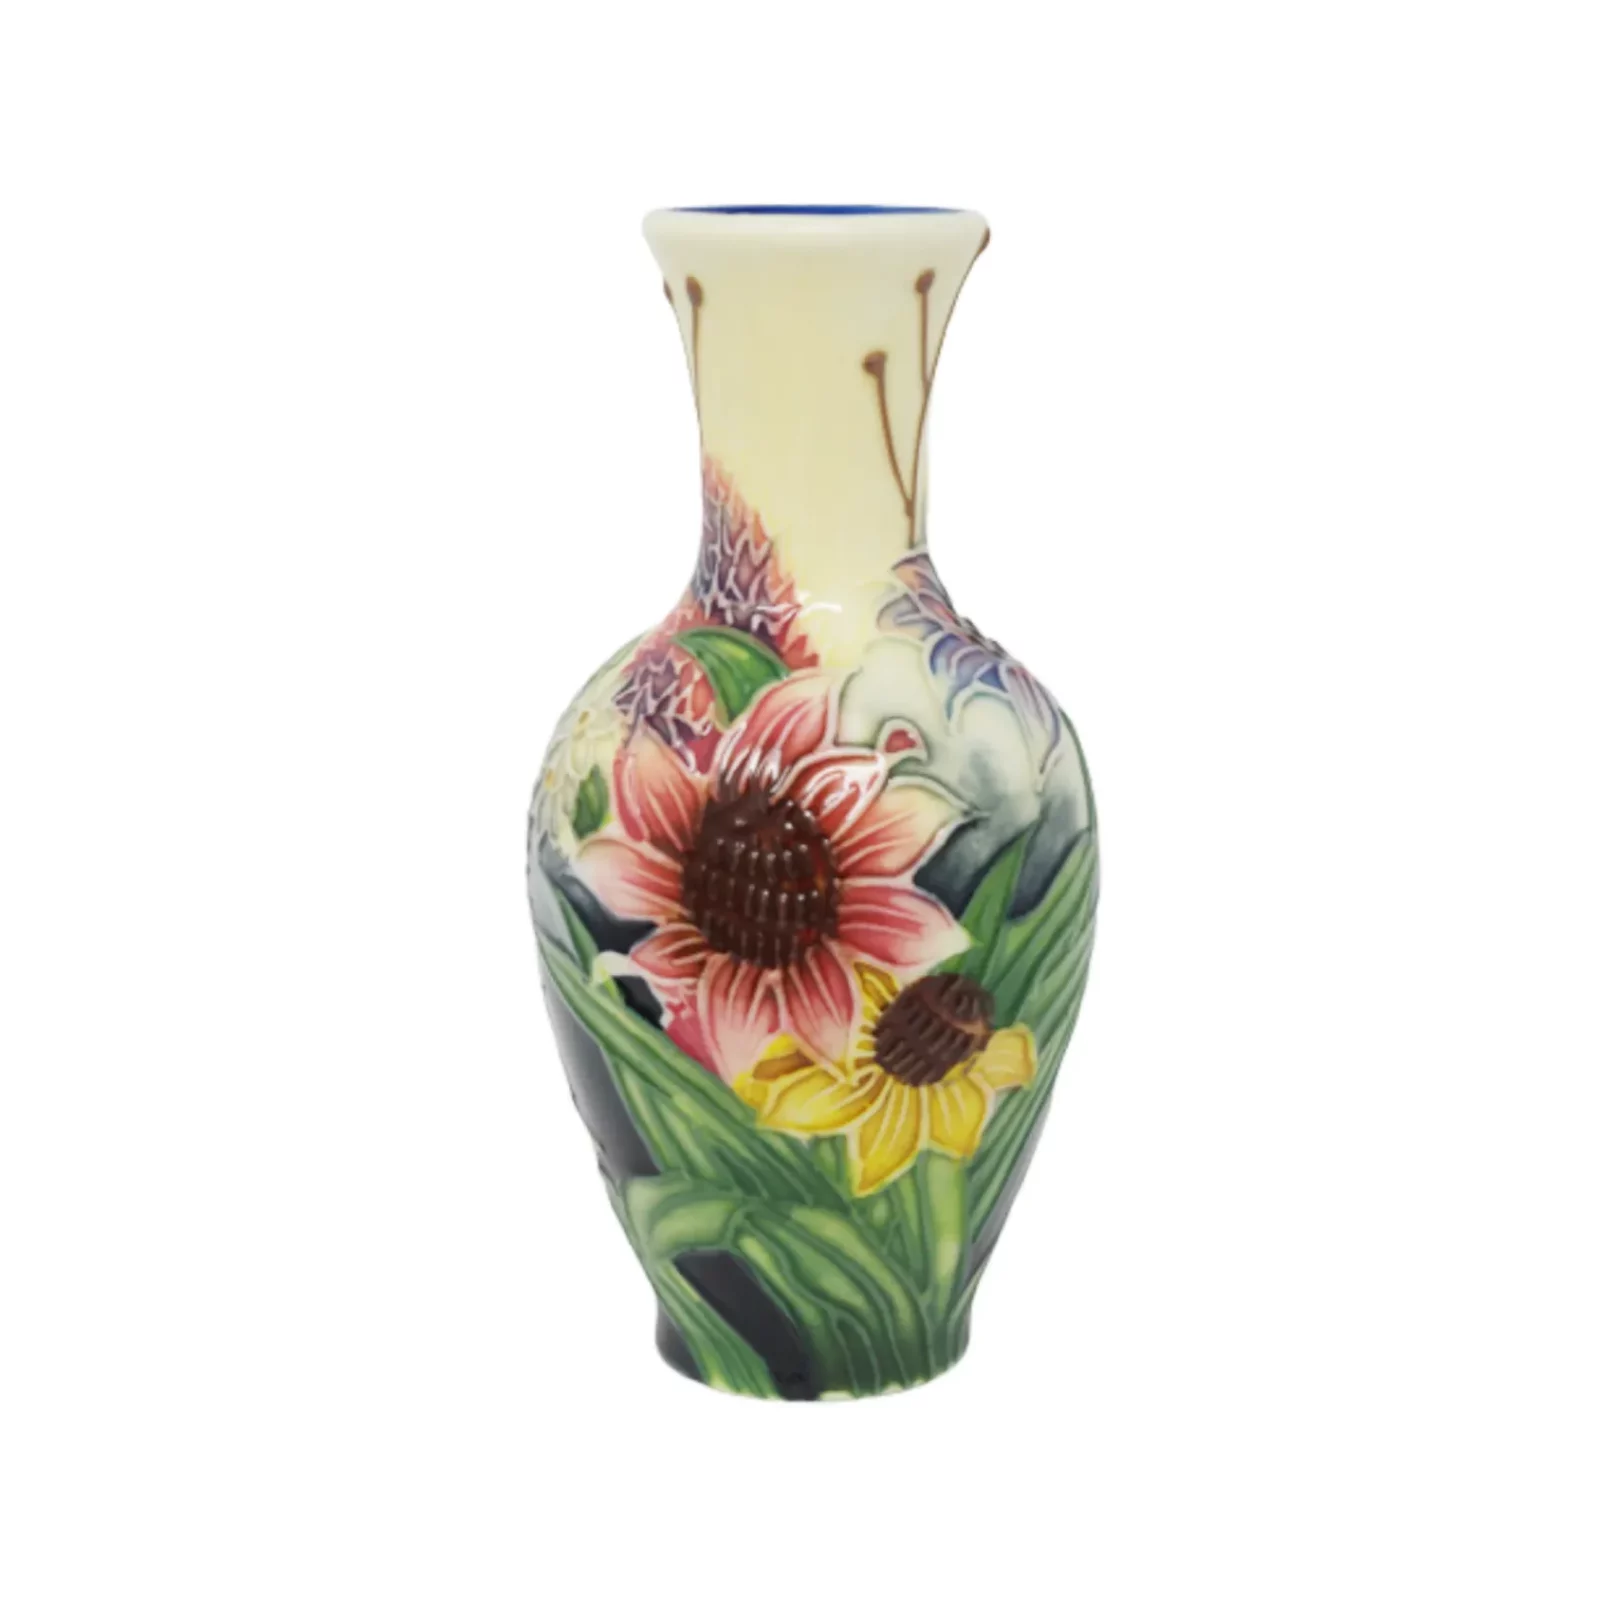 small vase with sunflowers pink and yellow decor cream neck tube lined gift worthy